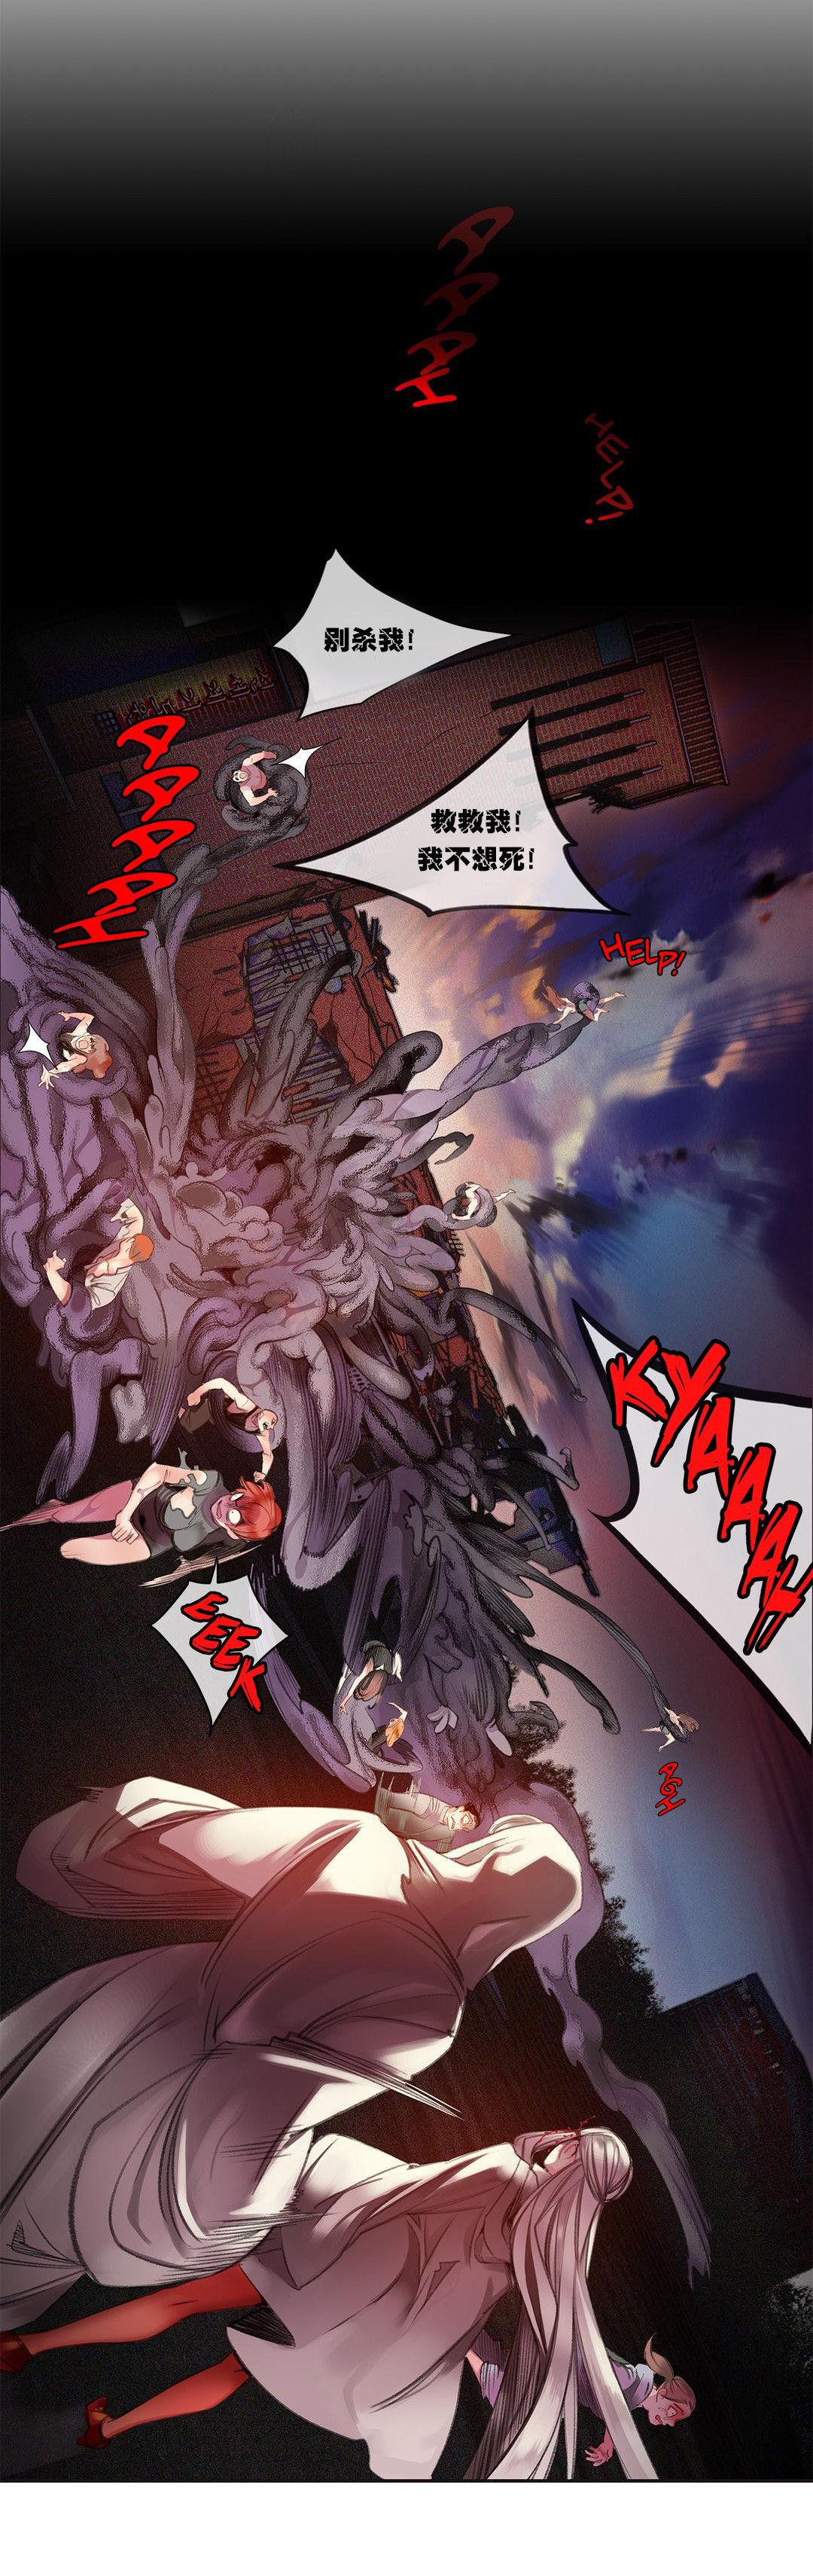 [Juder] Lilith`s Cord (第二季) Ch.61-64 [Chinese] [aaatwist个人汉化] [Ongoing] 15